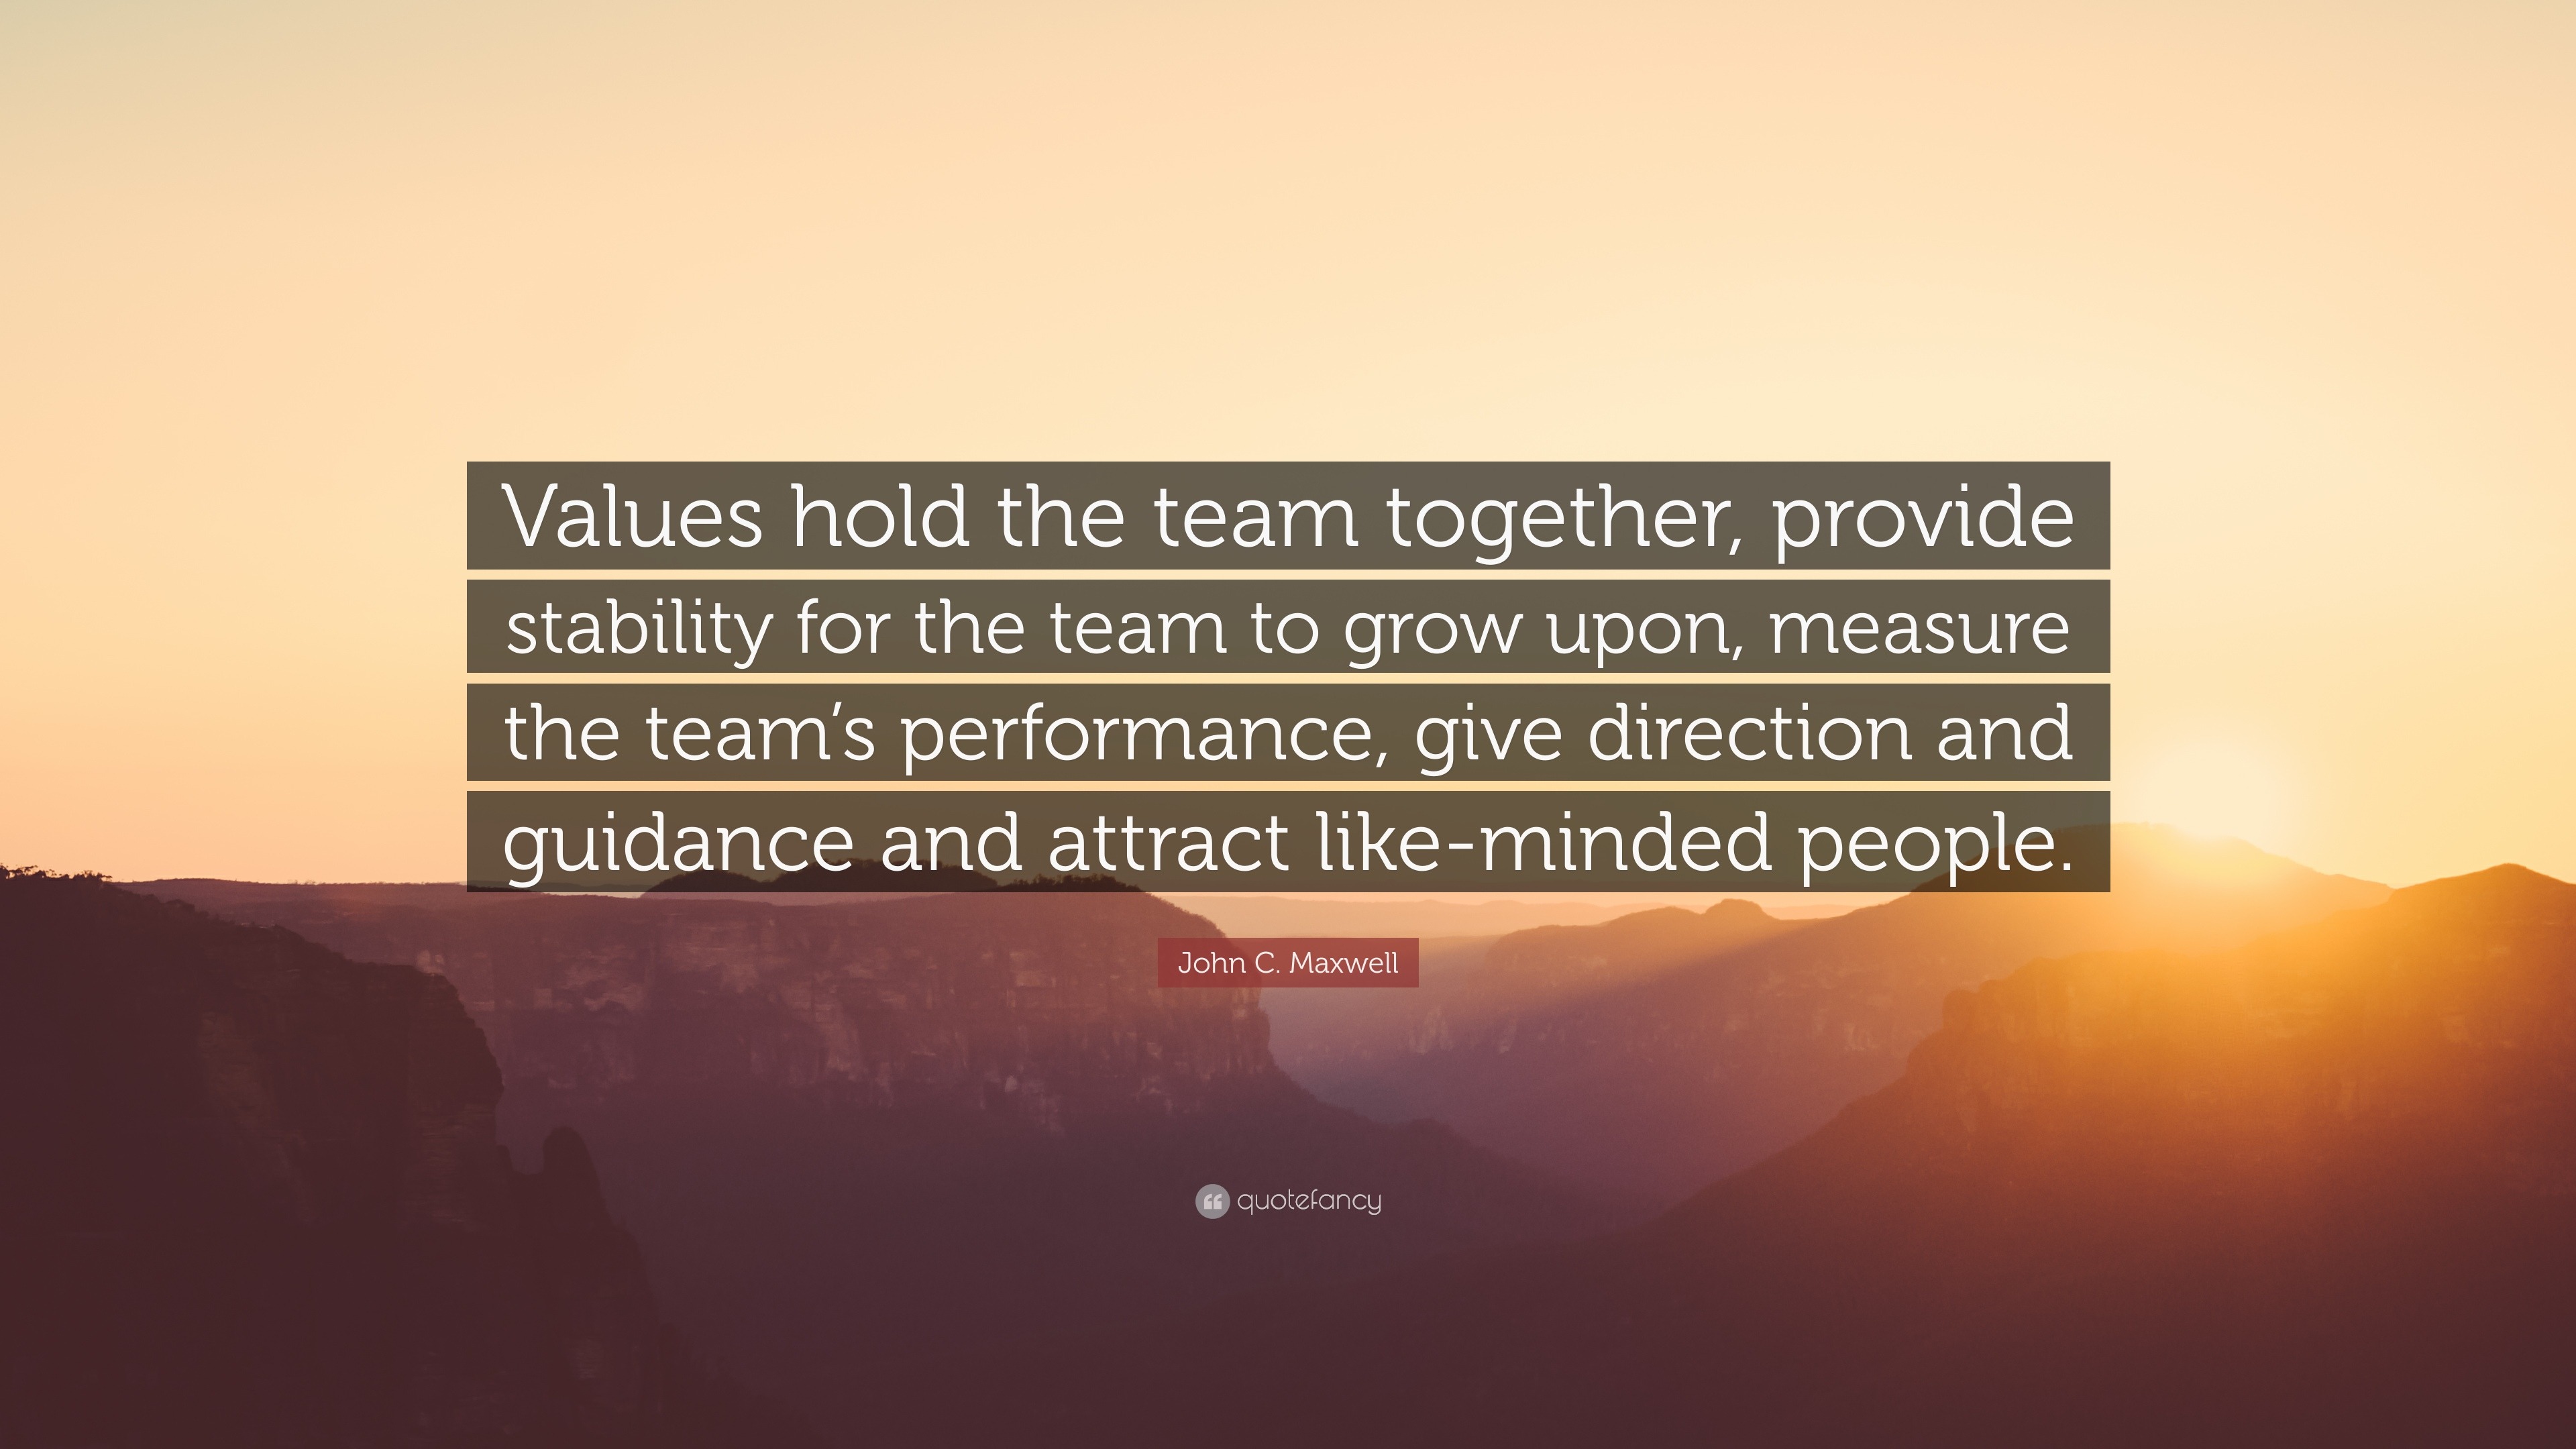 https://quotefancy.com/media/wallpaper/3840x2160/167217-John-C-Maxwell-Quote-Values-hold-the-team-together-provide.jpg